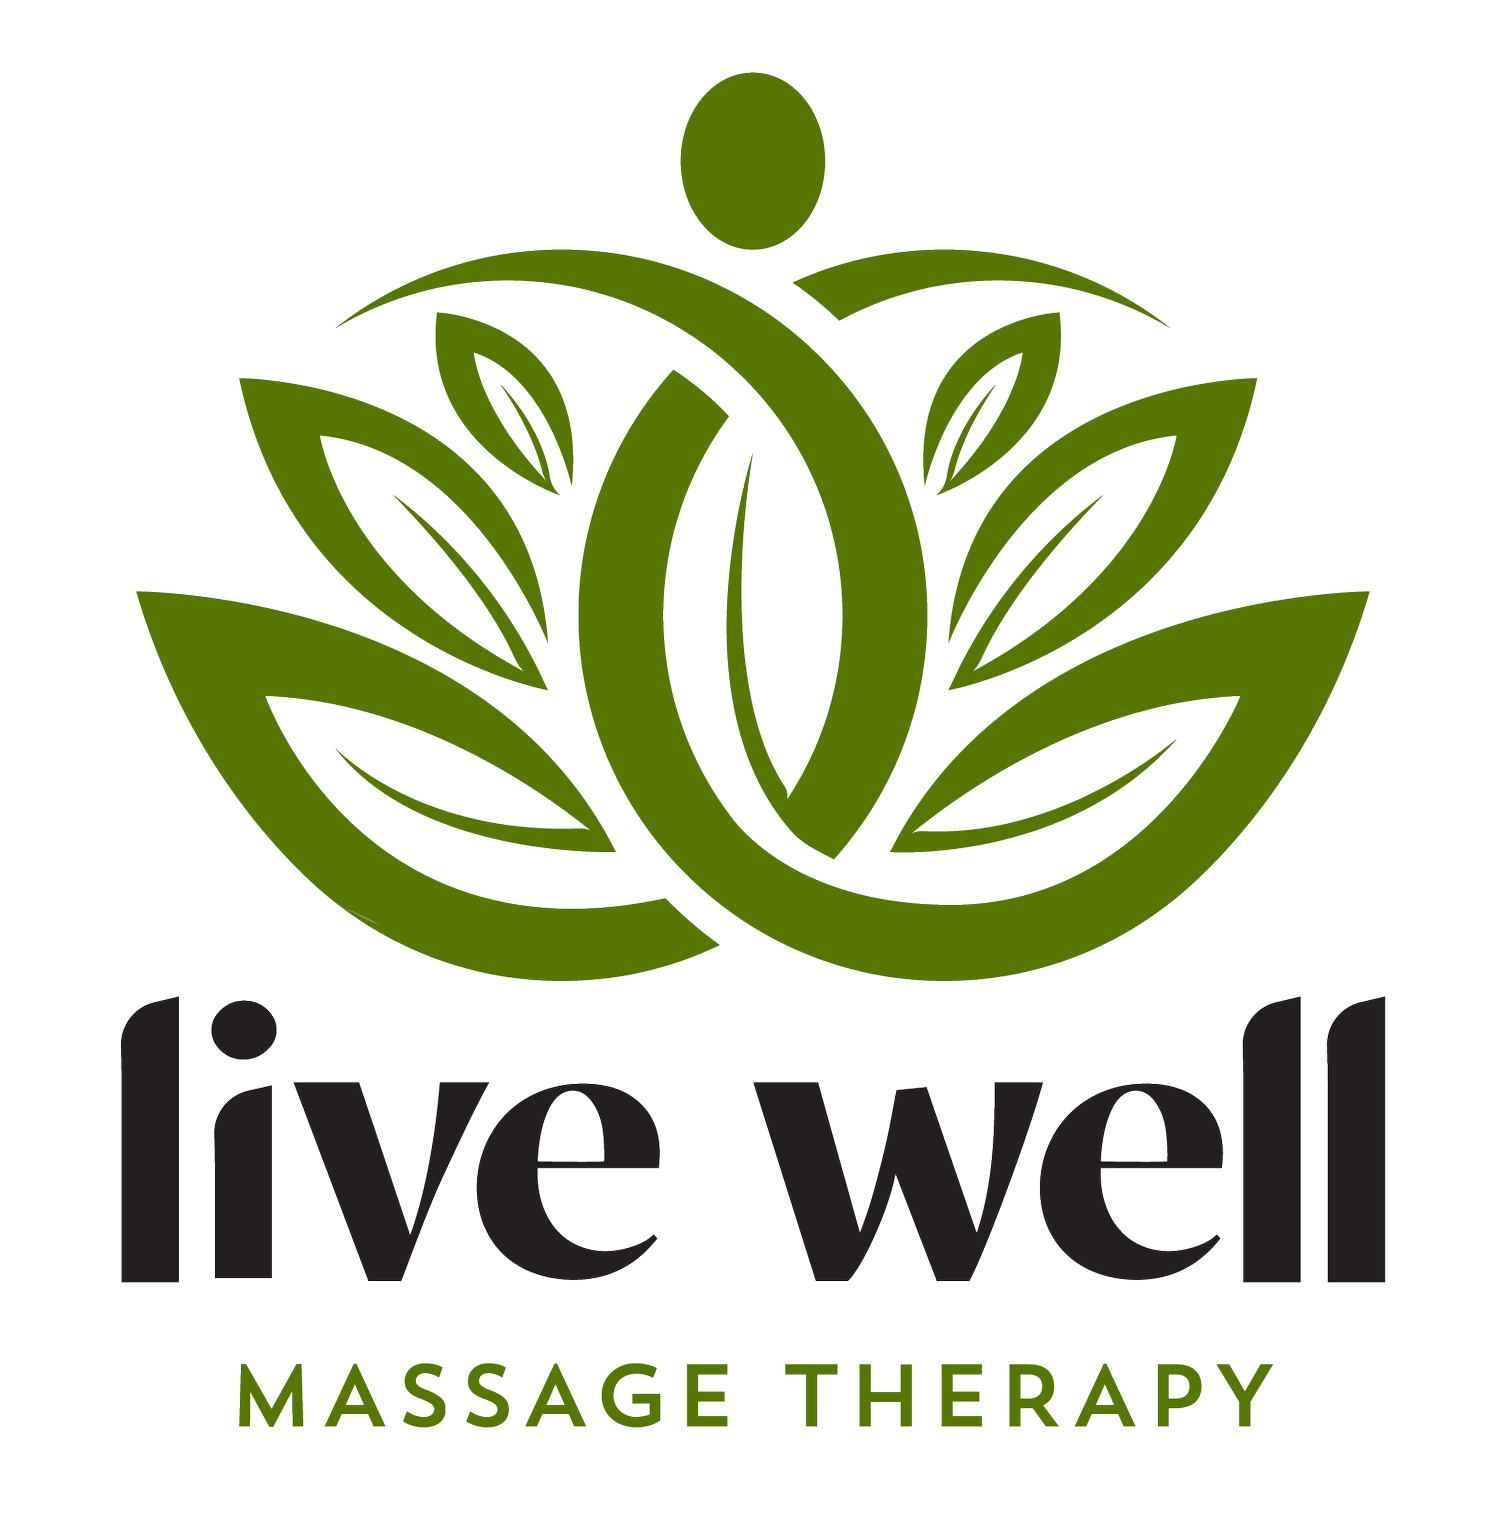 Live Well Massage Therapy